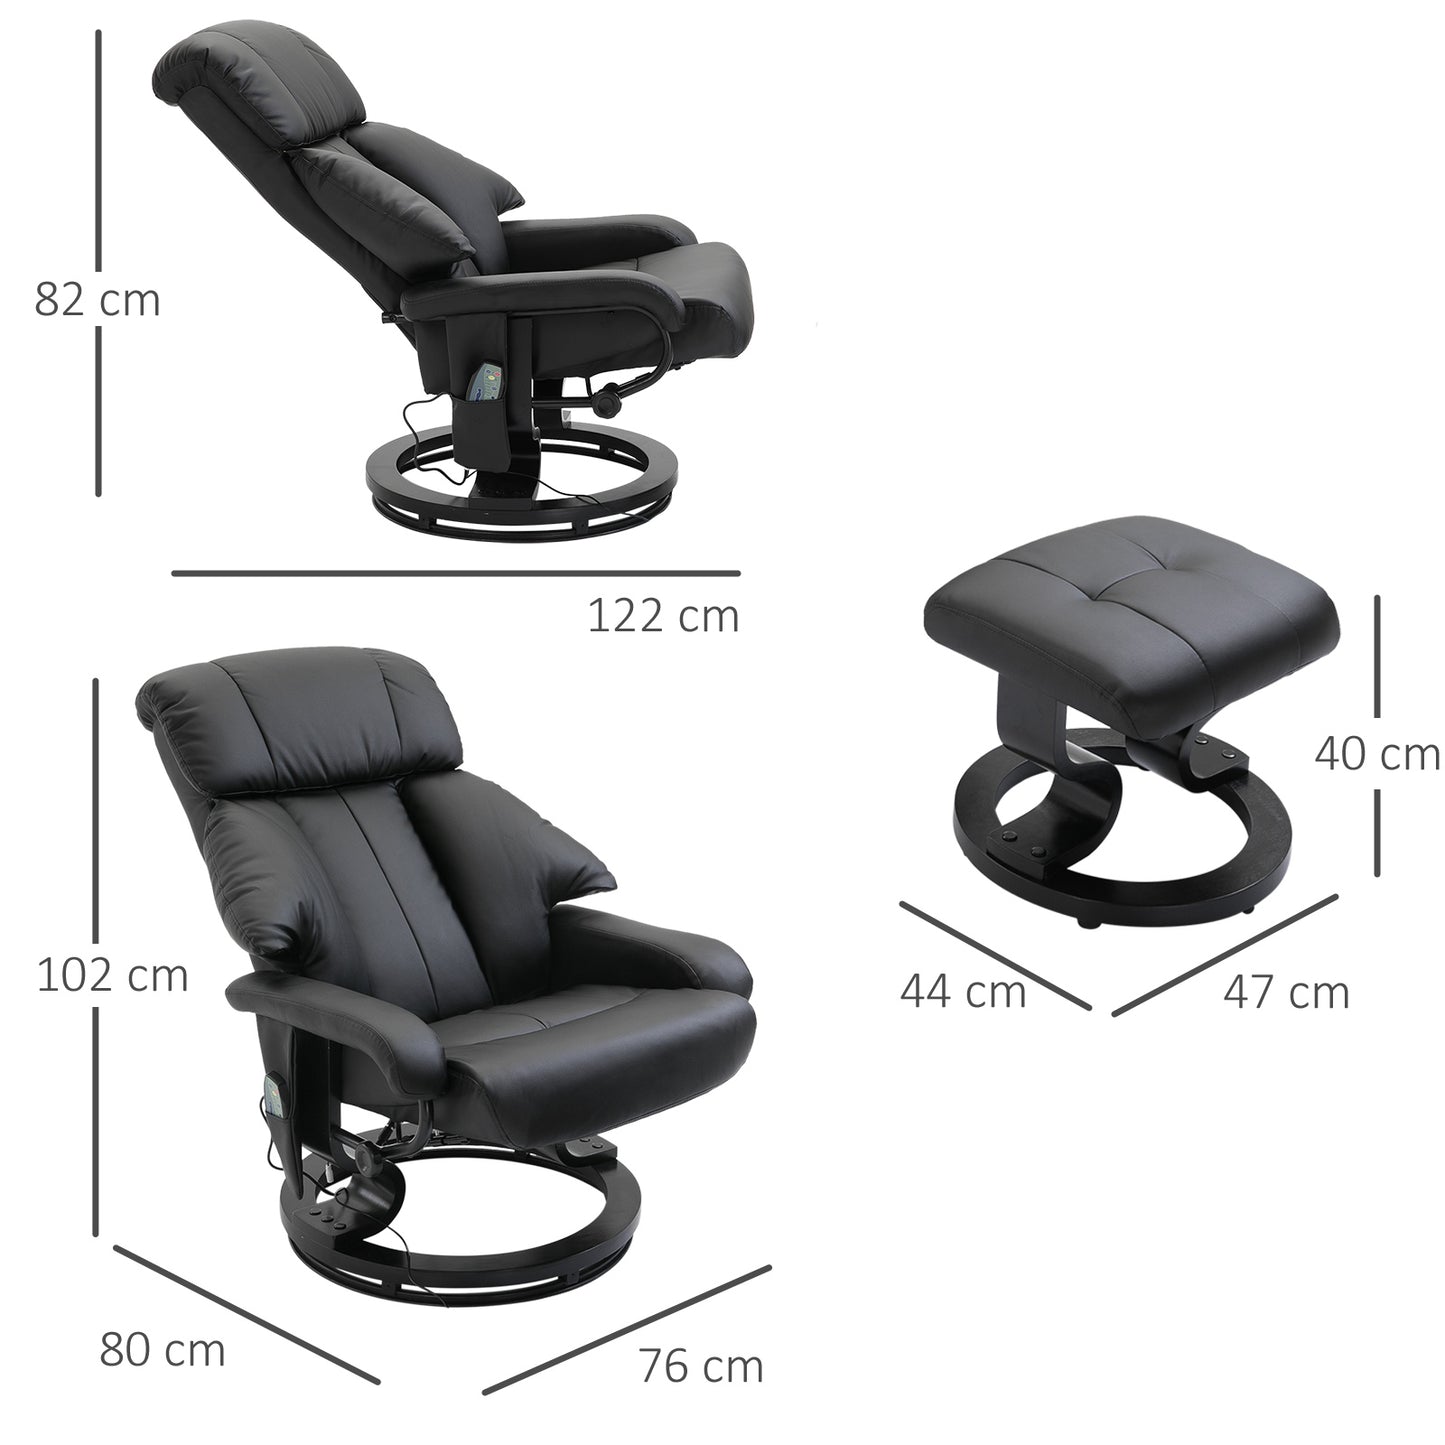 HOMCOM Recliner Chair Electric Massage Chair W/Foot Stool 10-Point Massage Couch-Black